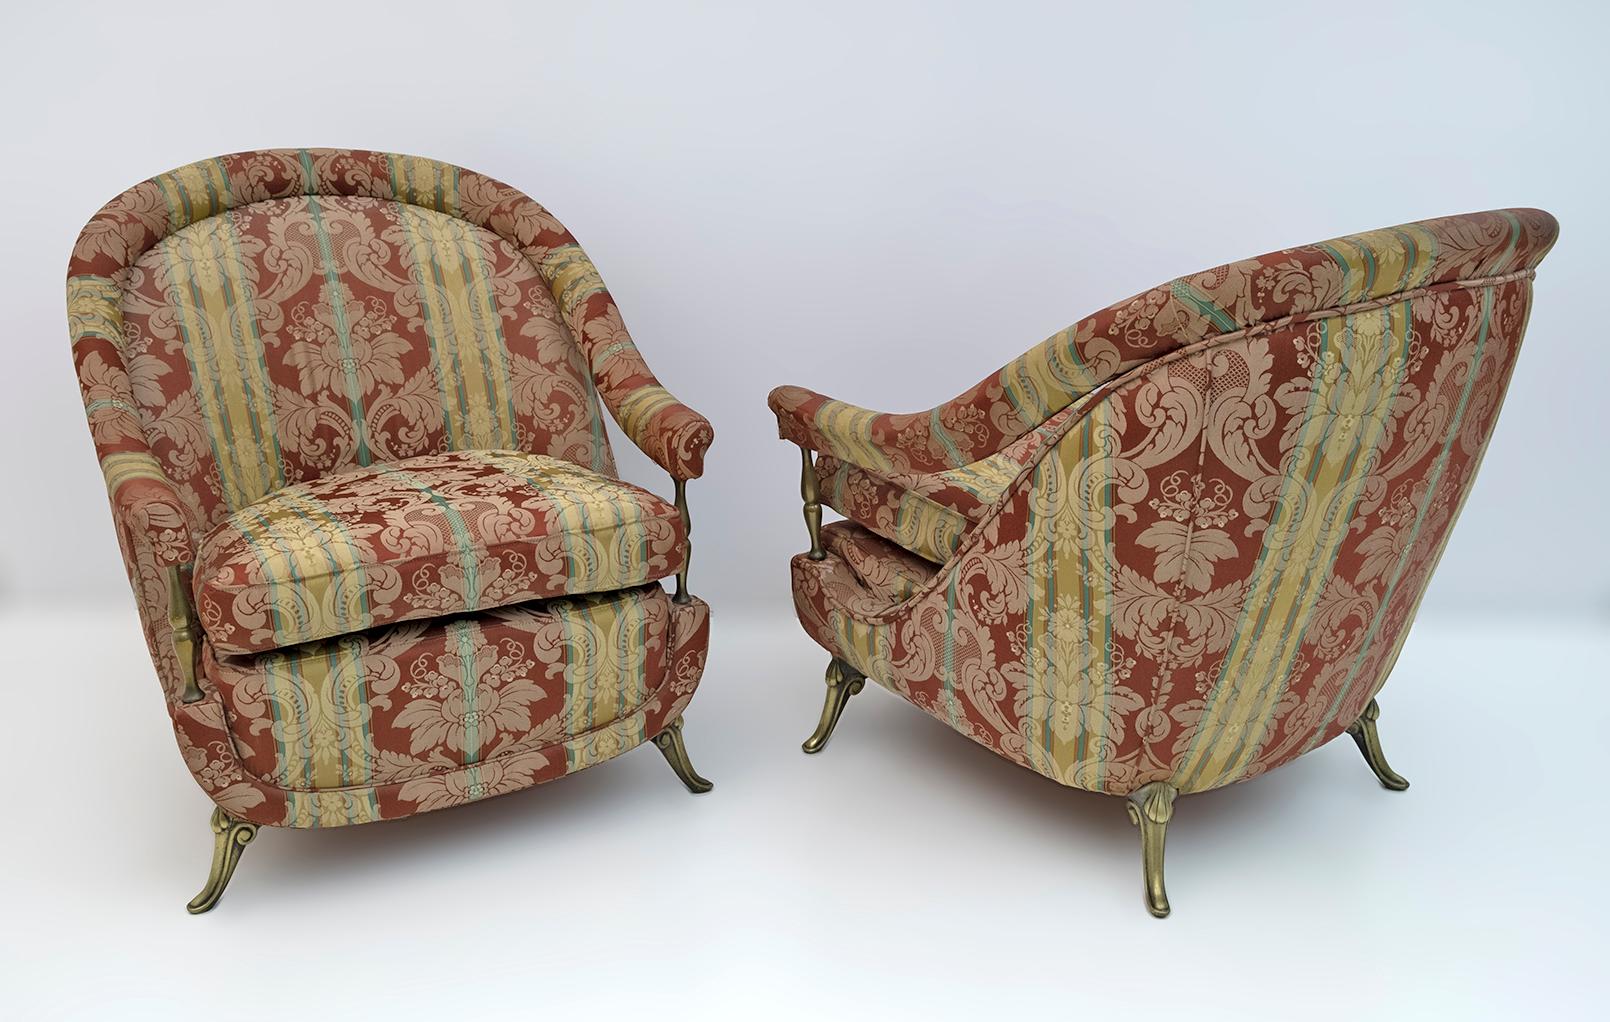 Pair of Art Deco style armchairs, with feet and columns to support the armrests, in brass. The upholstery was redone twenty years ago but is worn and stained, new upholstery is recommended. French production from the 1950s.
